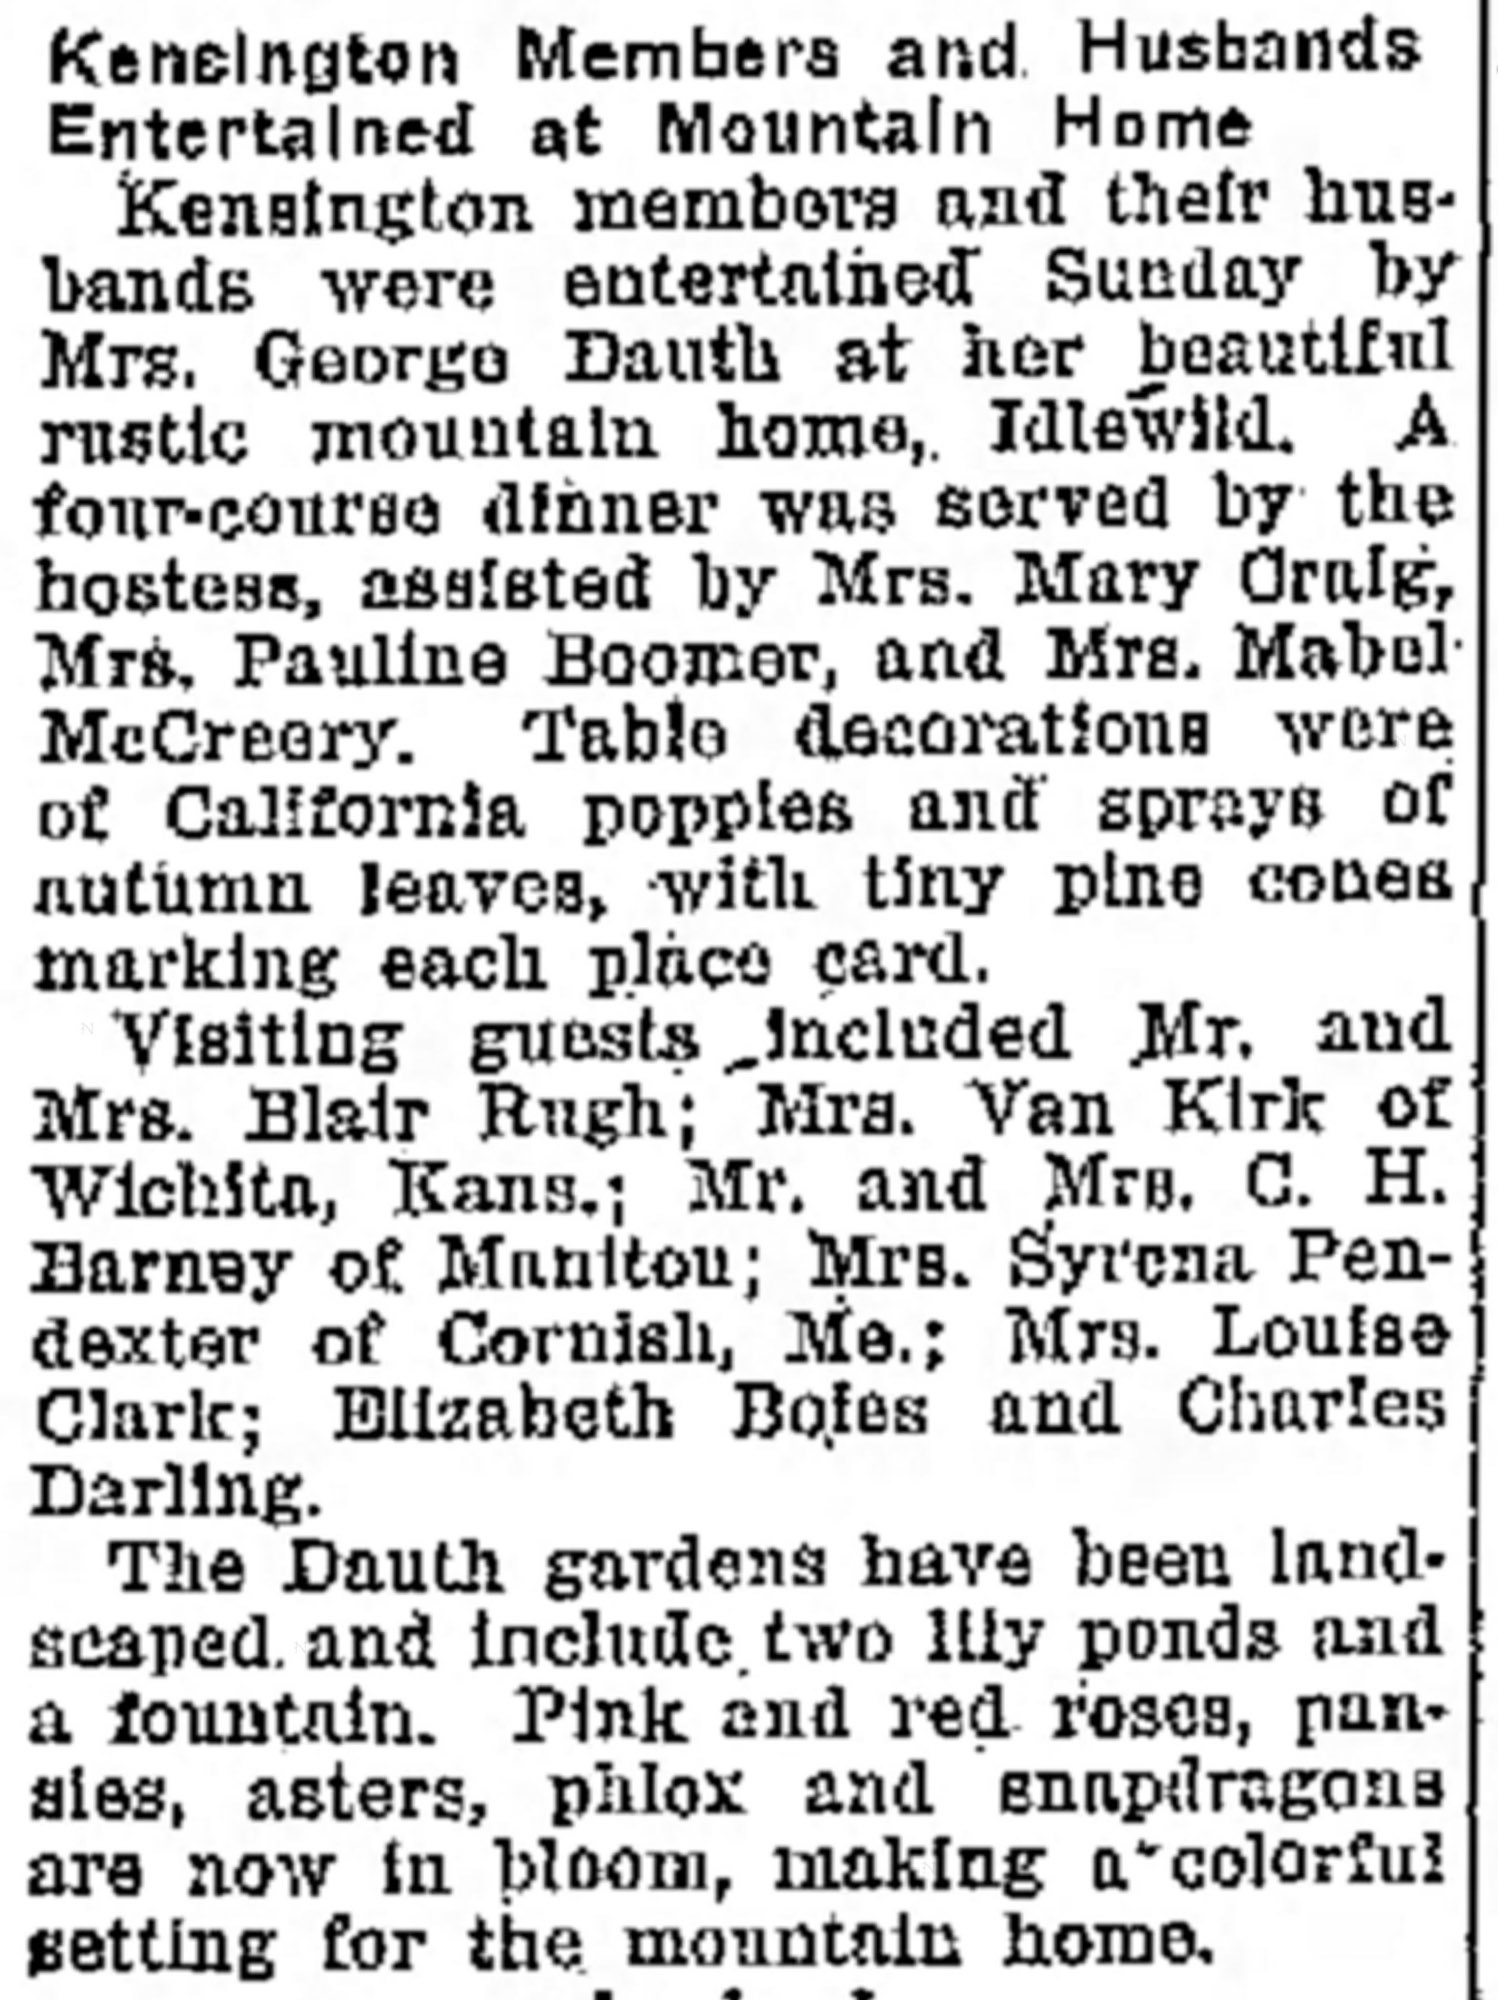 Dauth Family Archive - 1929-09-24 - Greeley Daily Tribune - Florence Dauth Hosting Kensington Club At Idlewild